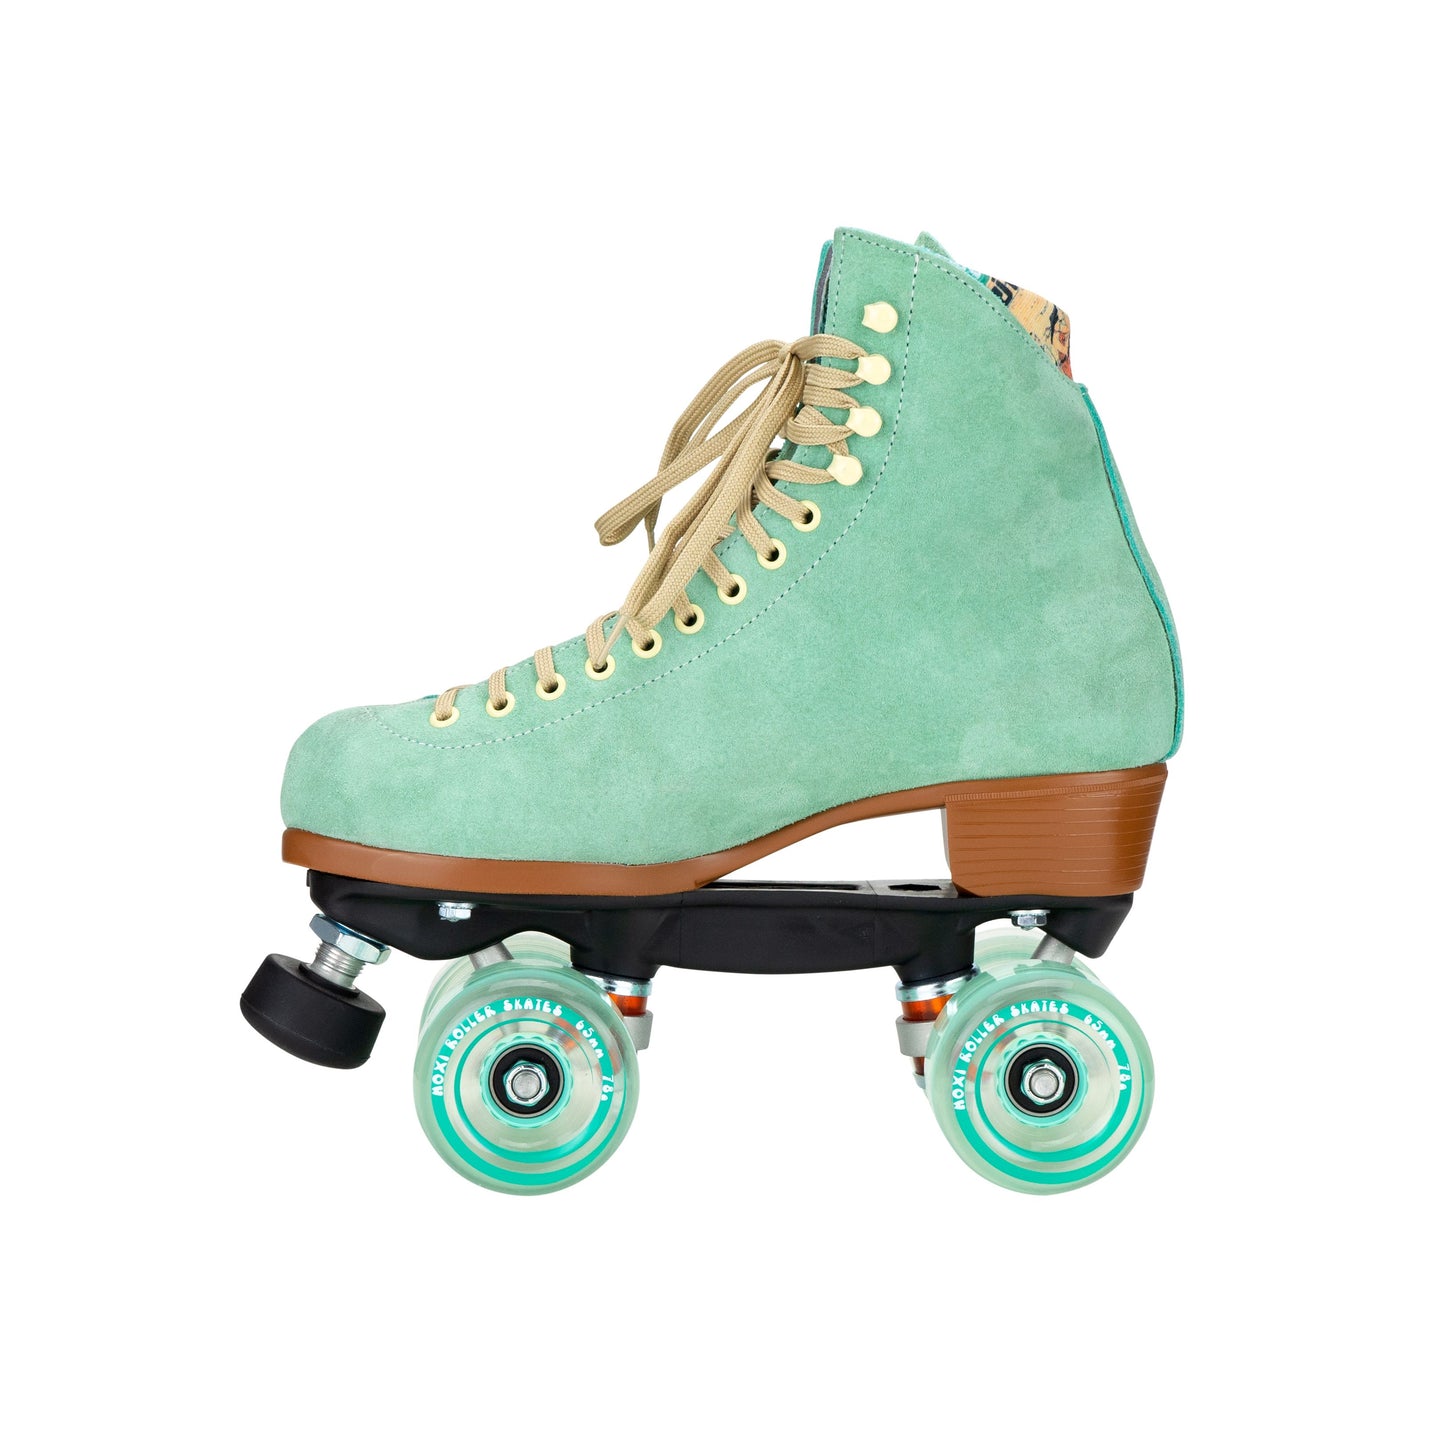 Come to Fresa's Roller Skate shop in Las Vegas and get your Moxi Lollys Skates. These floss Moxi Lolly Roller Skates are ready to the outdoor. Cruise around Las Vegas Art District or come and skate in our indoor skate ramp.